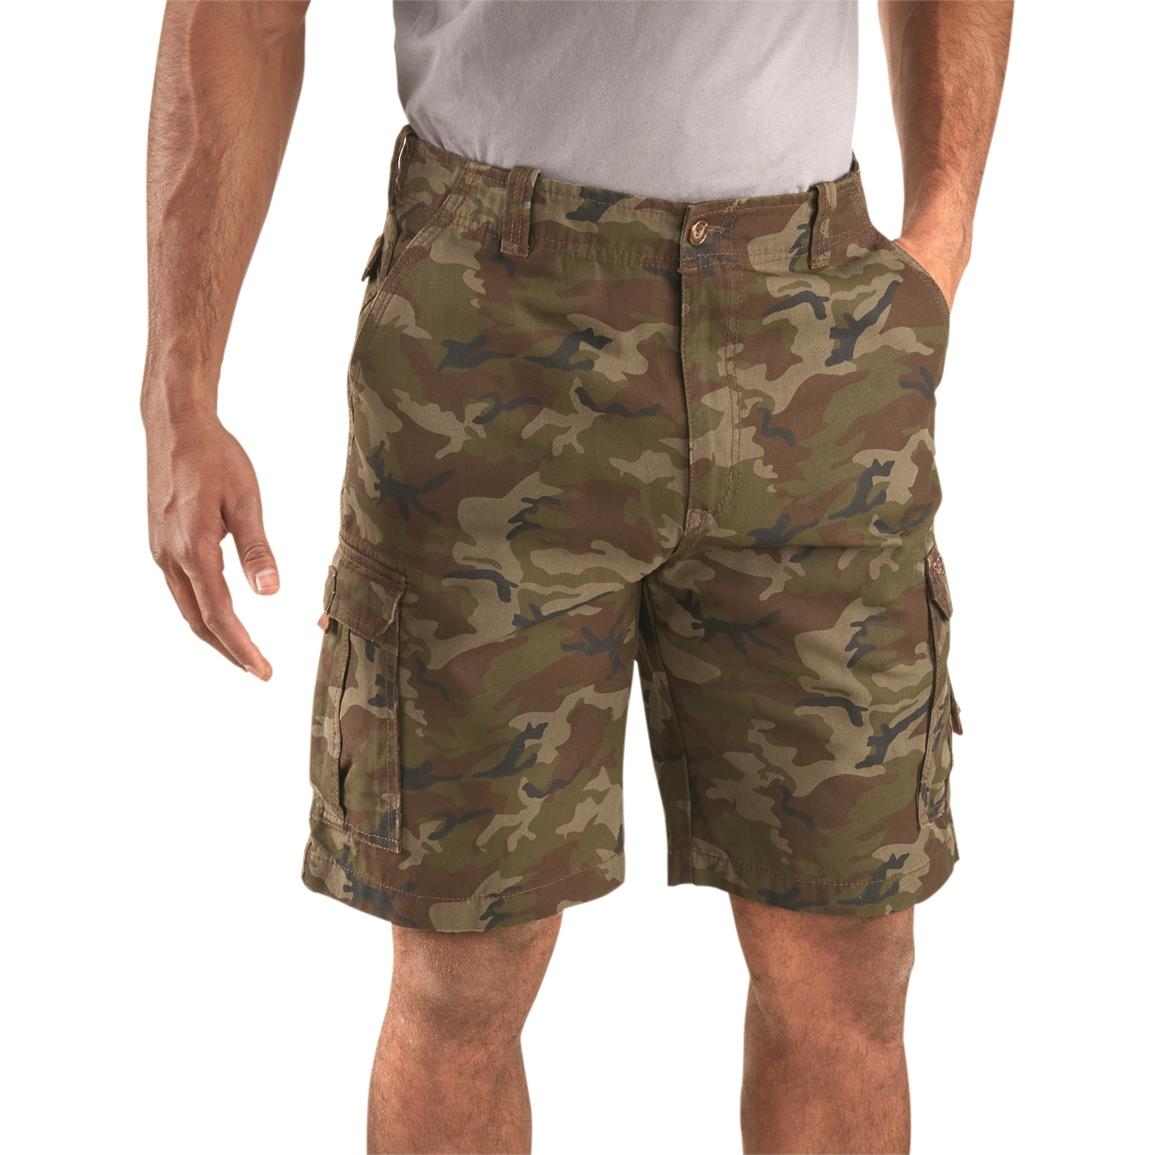 Guide Gear Men's Outdoor Cargo Shorts - 677831, Shorts at Sportsman's Guide